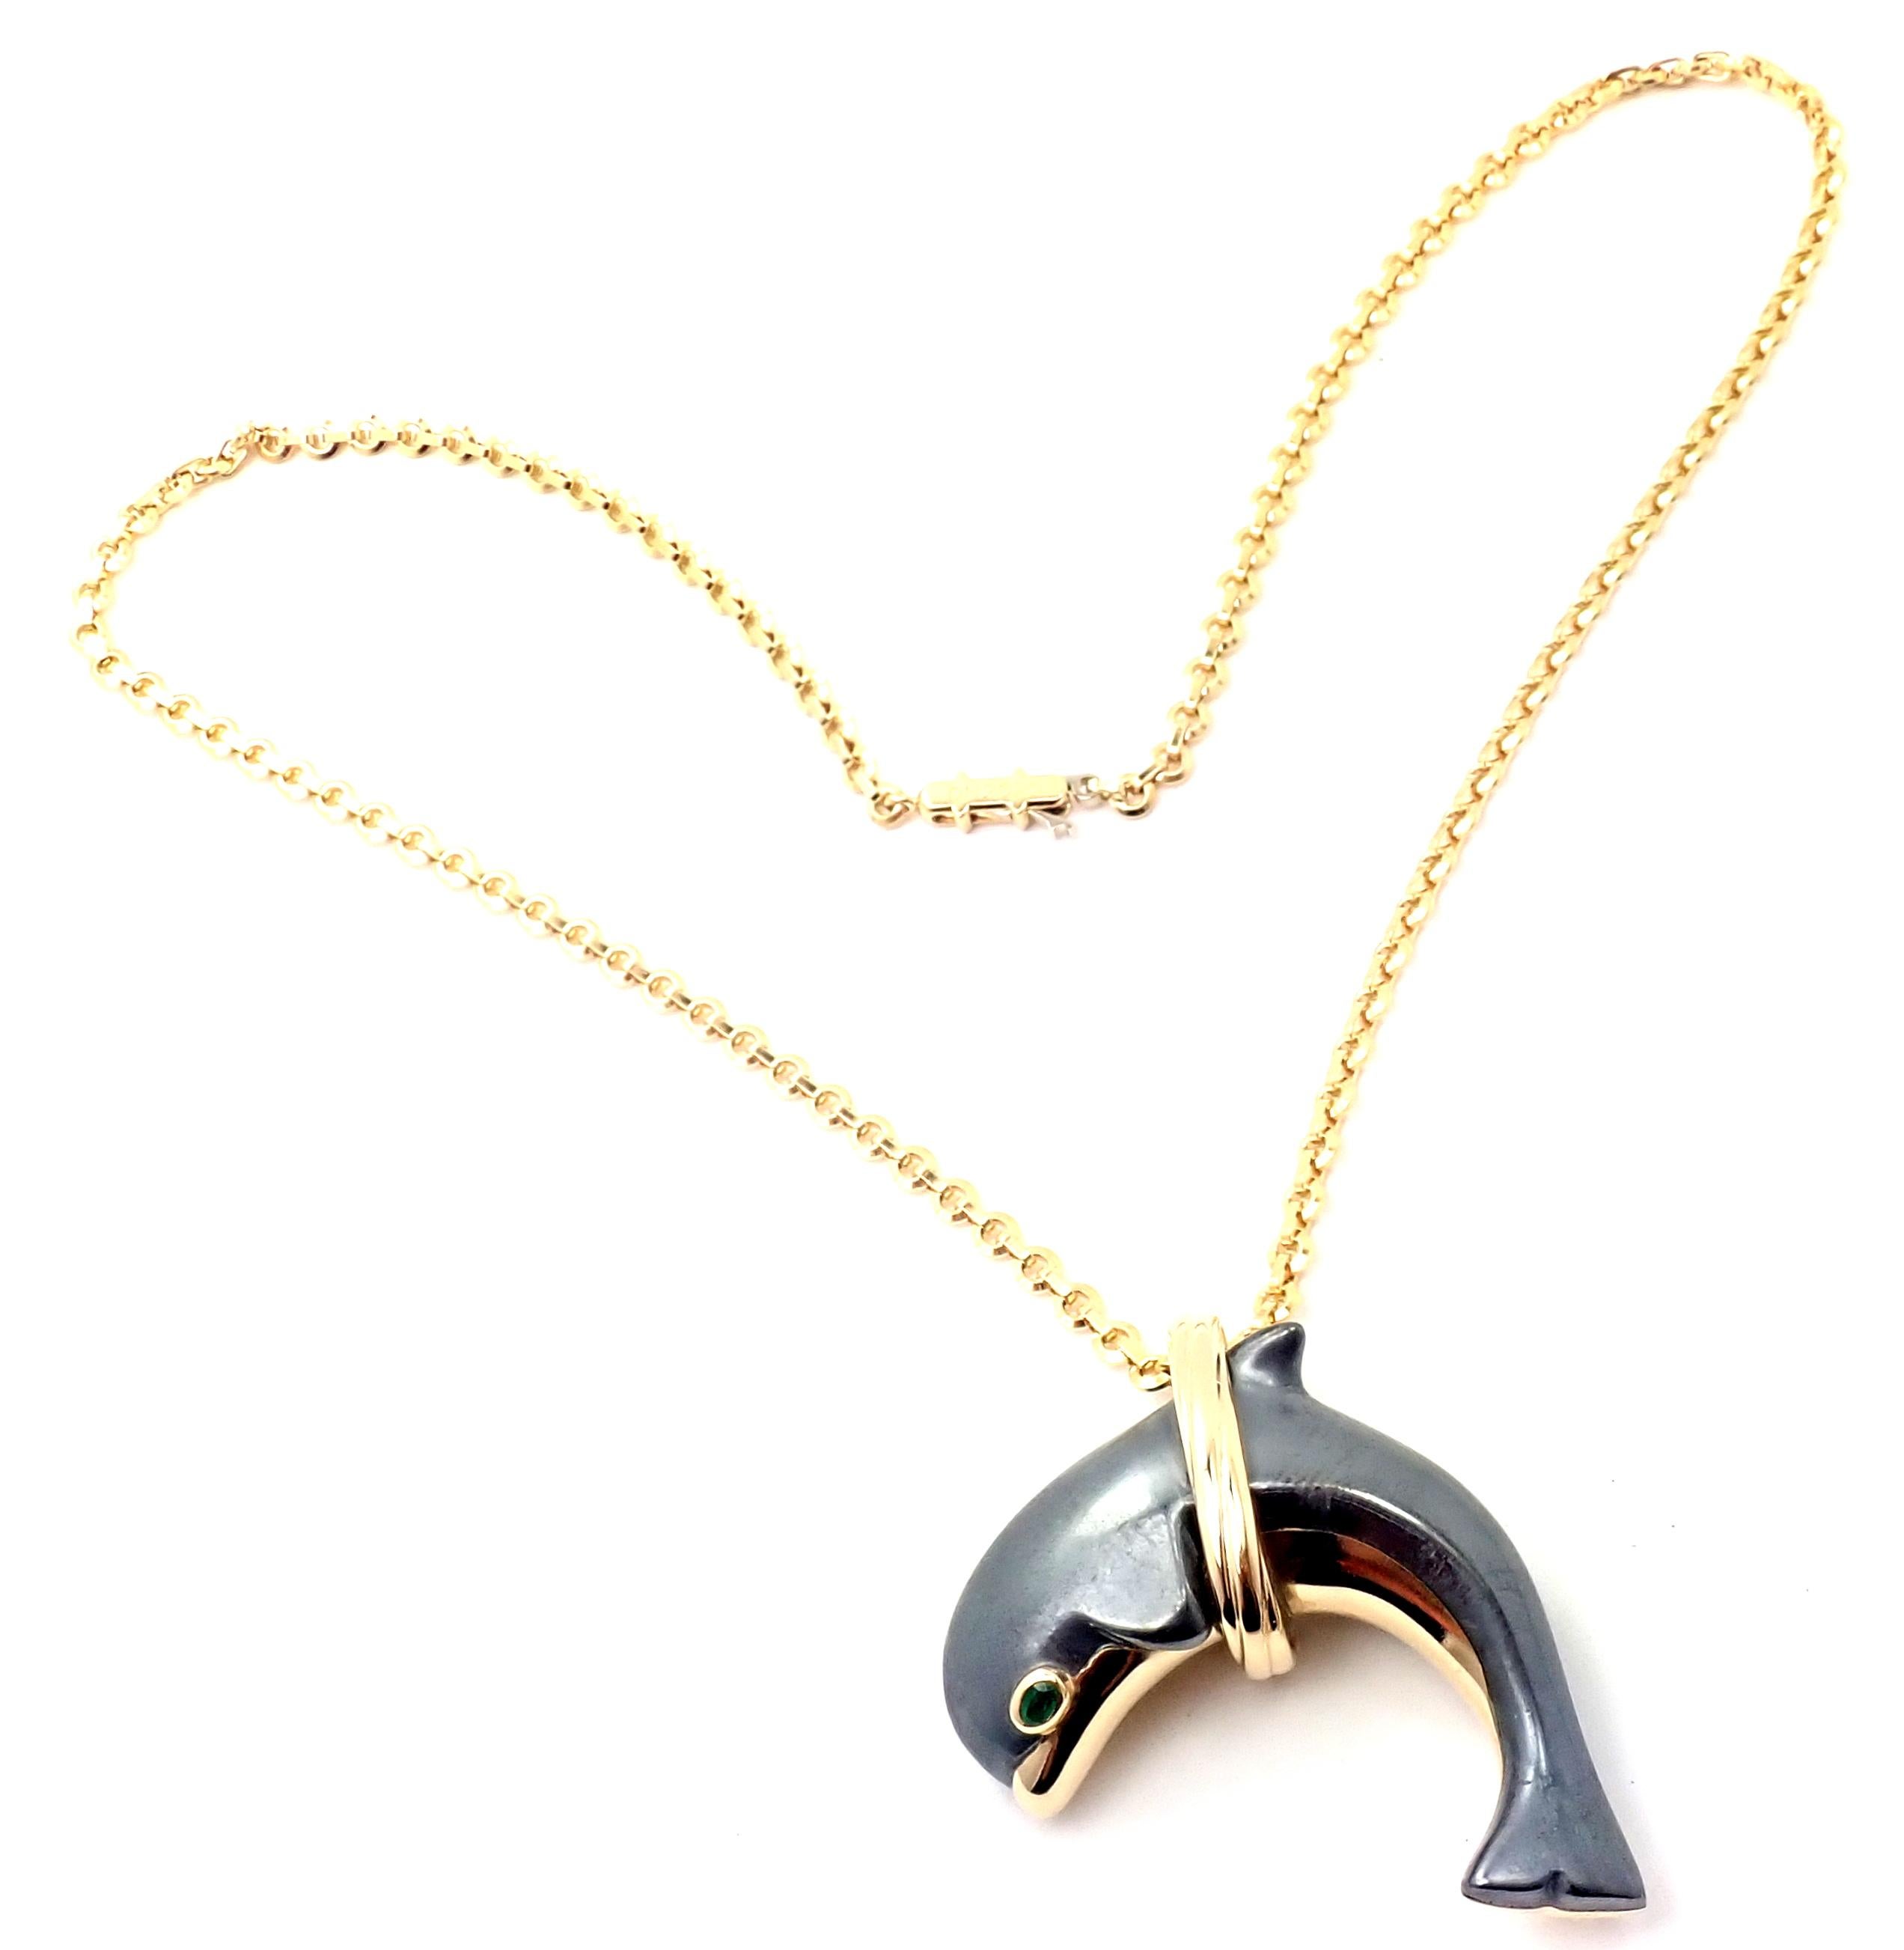 18k Yellow Gold Hematite Dolphin Pendant Necklace by Cartier. 
With 1 round emerald in the eye
Hematite stone
Details:
Pendant: 46mm x 32mm
Chain: Length: 16.5